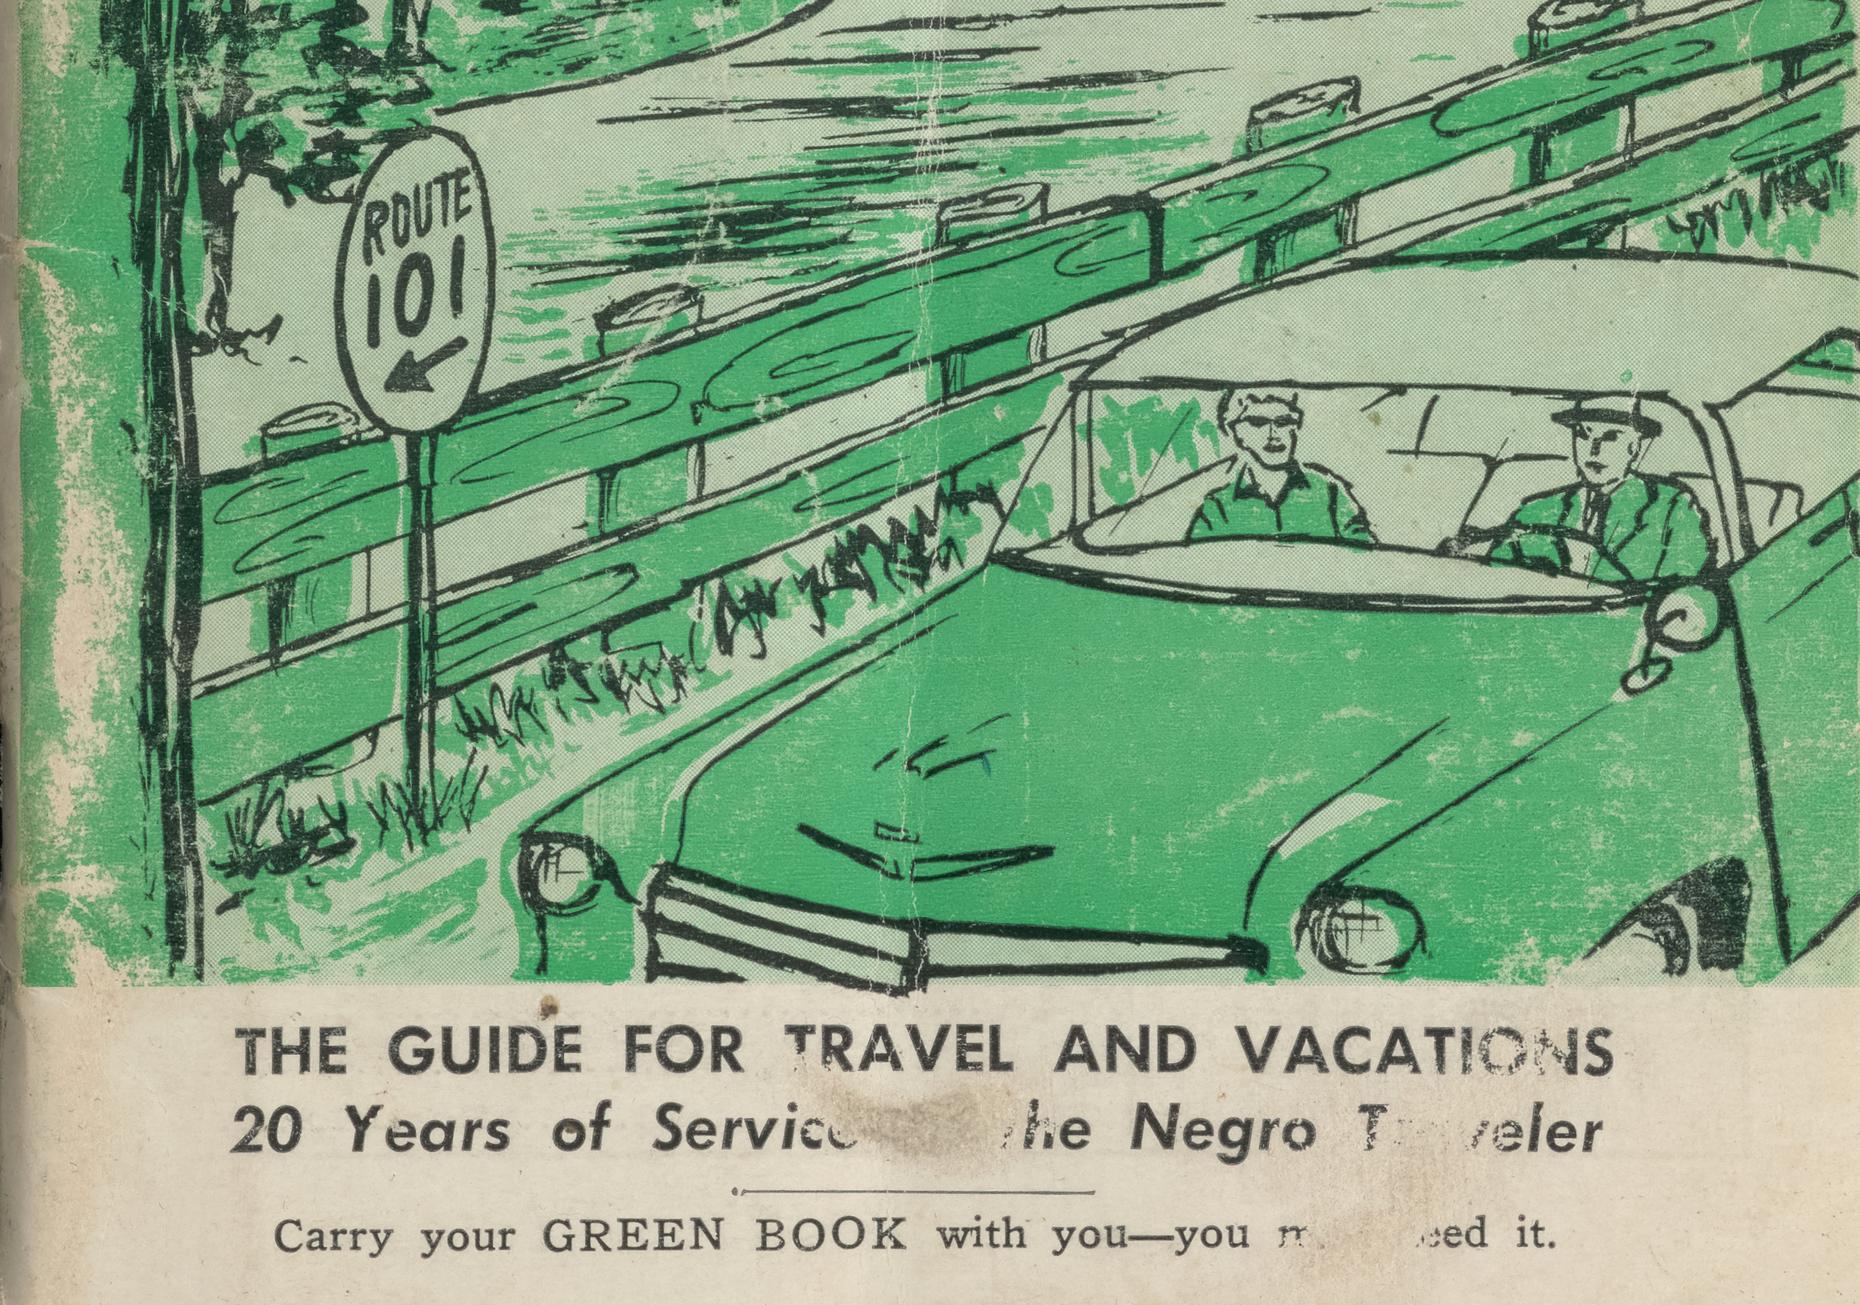 Mapping the Book that Guided Black Travelers Across a Segregated America |  WNYC News | WNYC